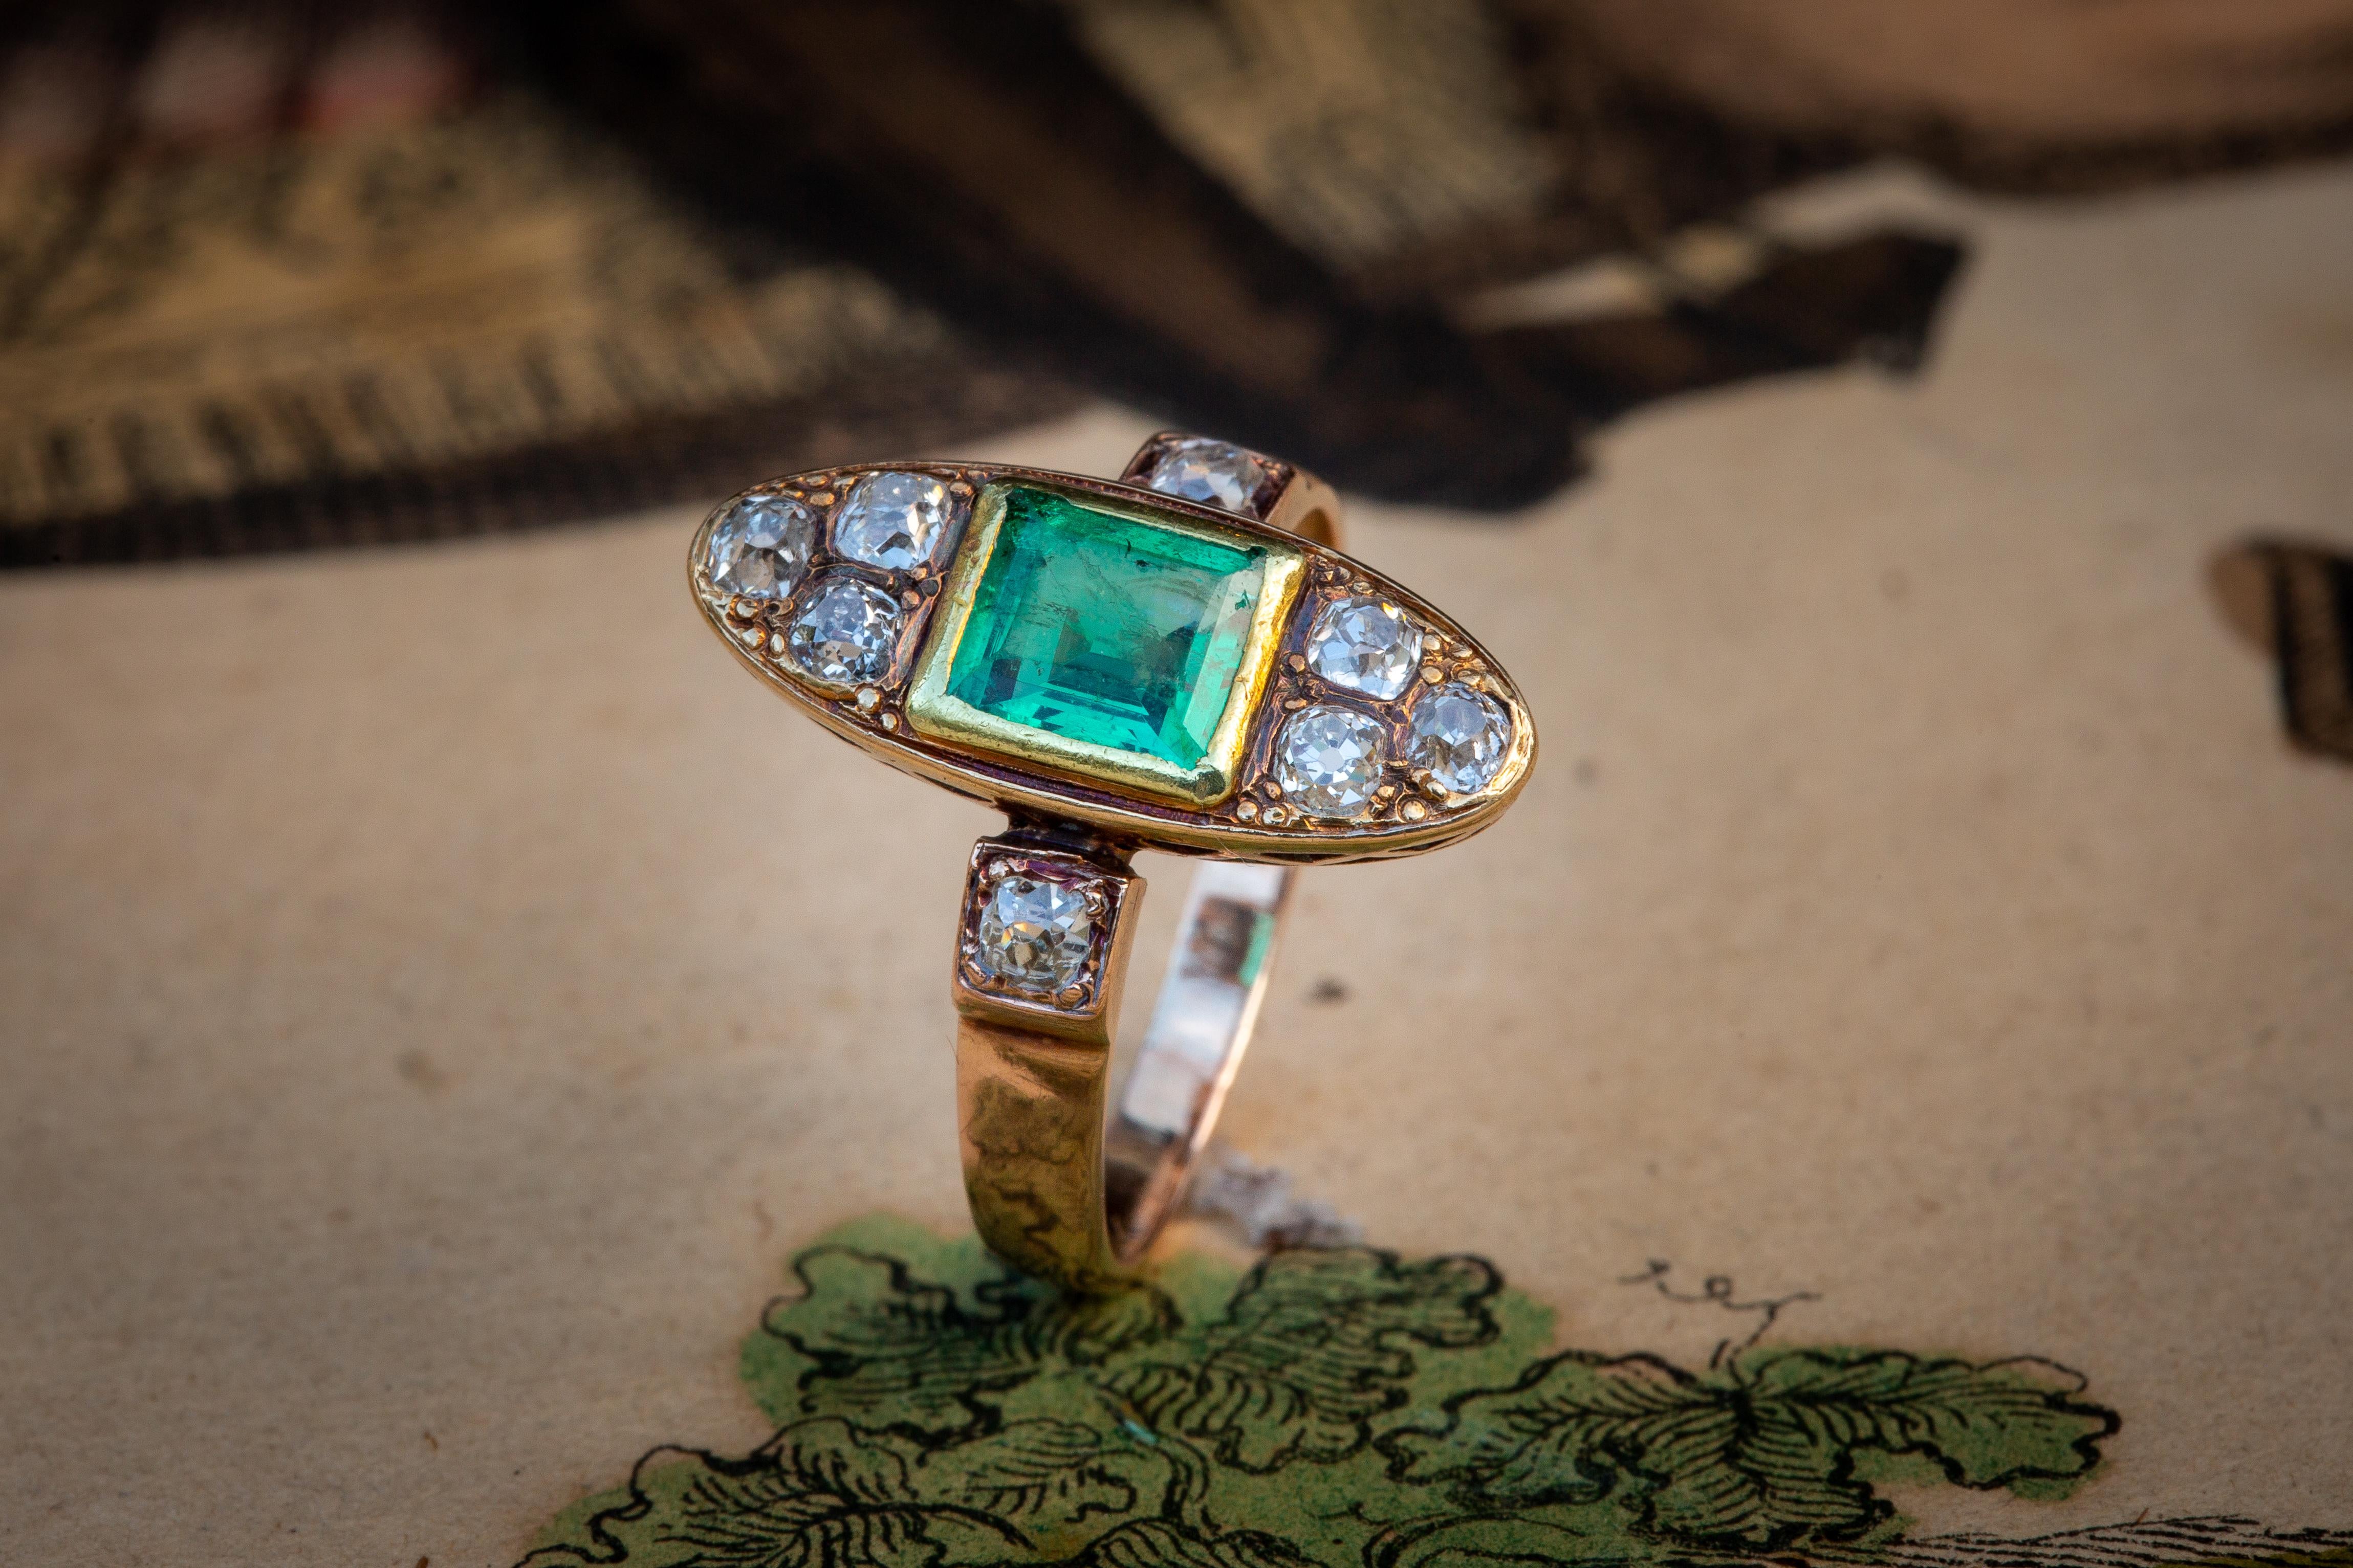 Victorian French 19th Century 18K Gold Ring with Emerald and Old Mine Cut Diamonds